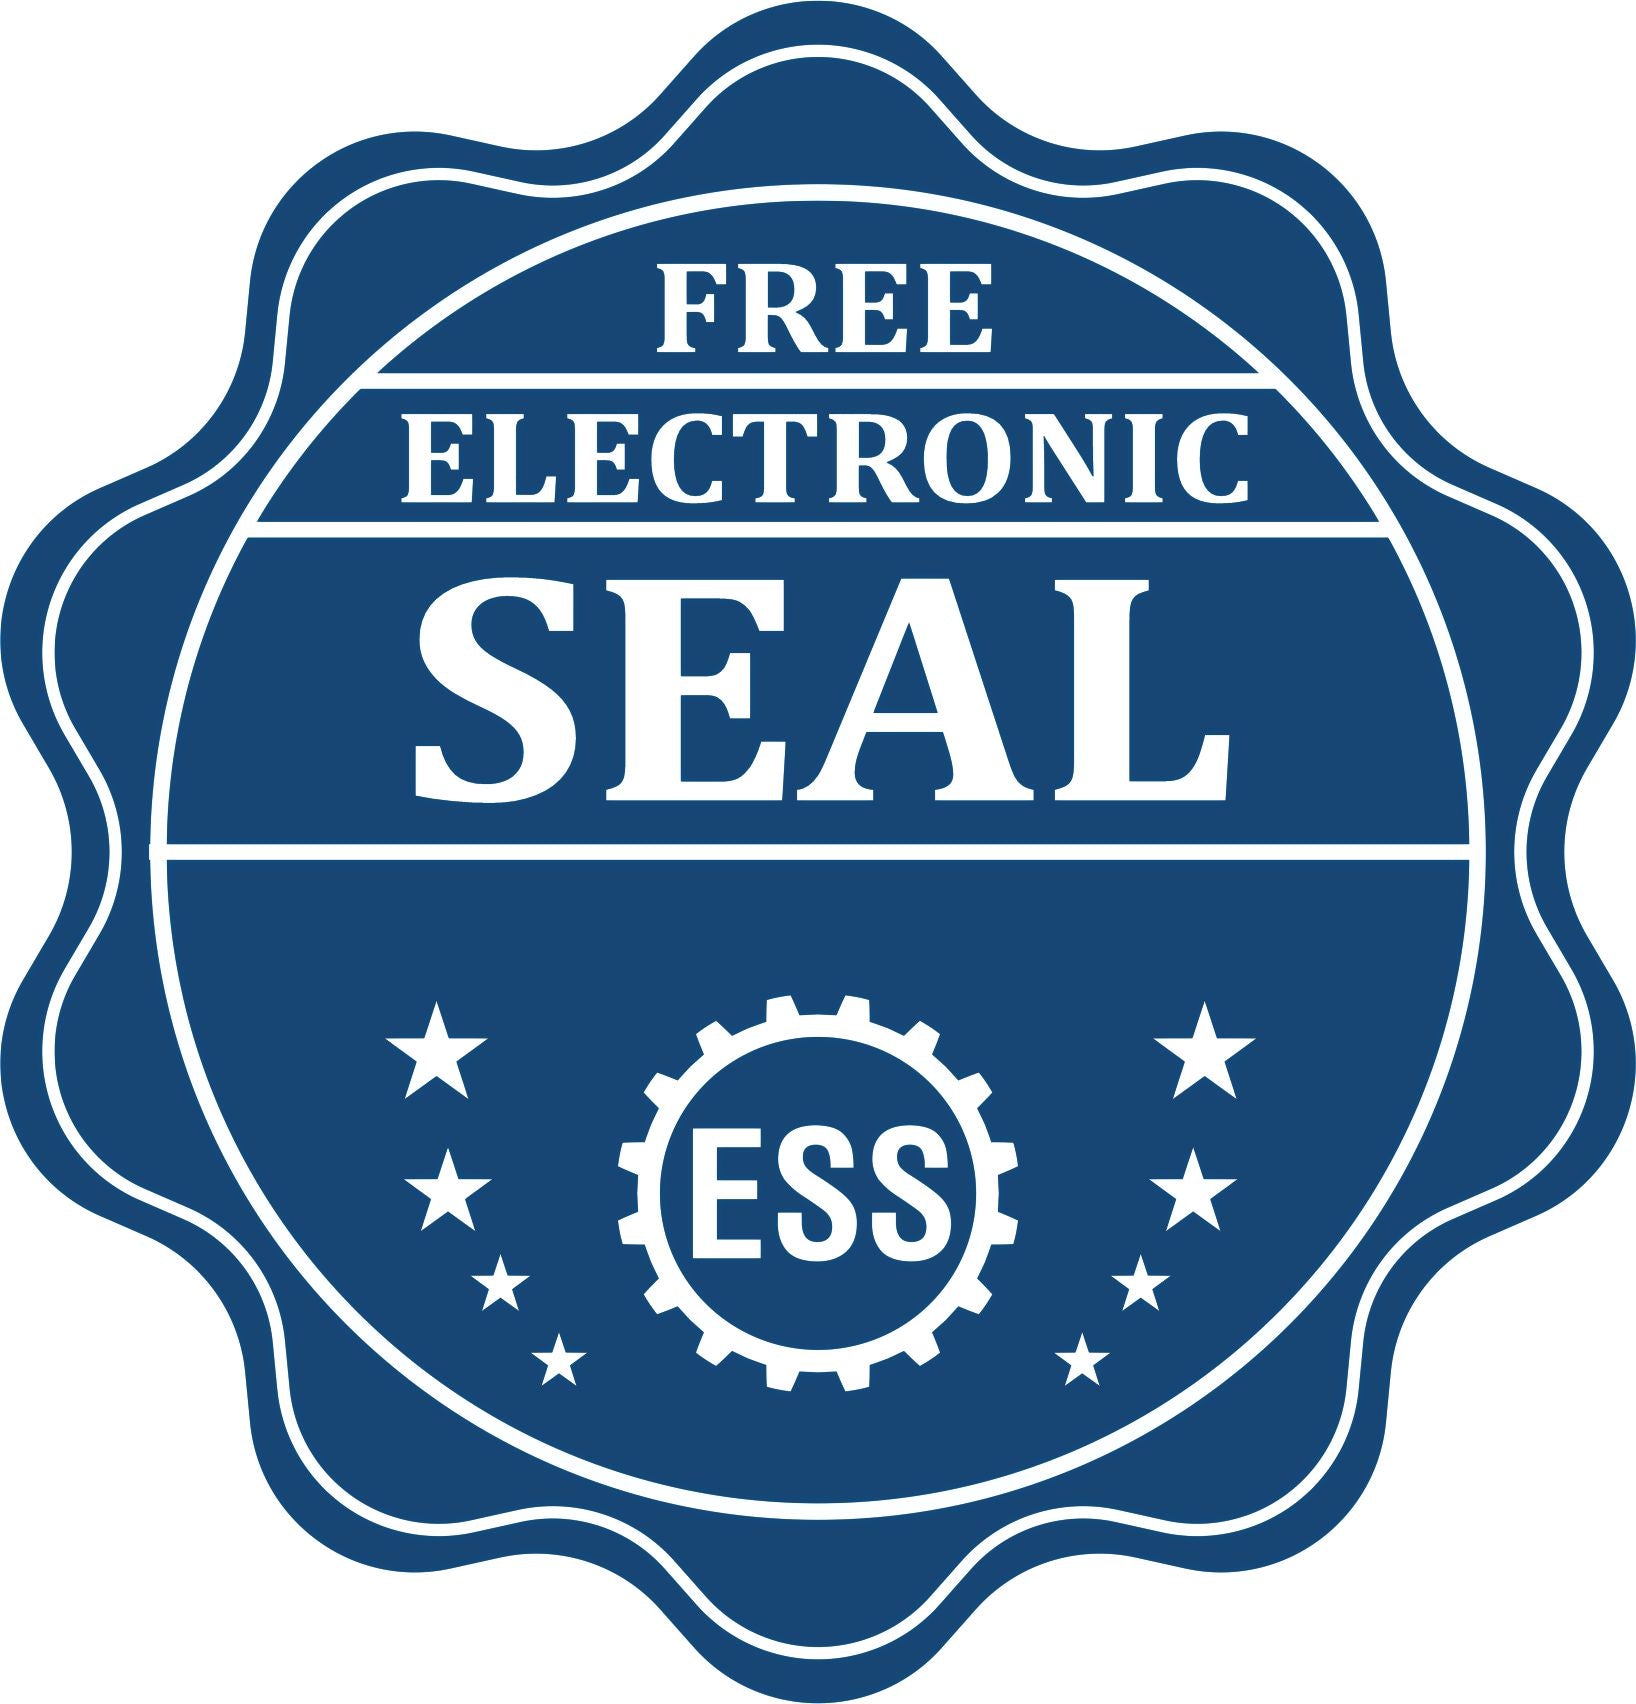 A badge showing a free electronic seal for the Slim Pre-Inked Michigan Landscape Architect Seal Stamp with stars and the ESS gear on the emblem.